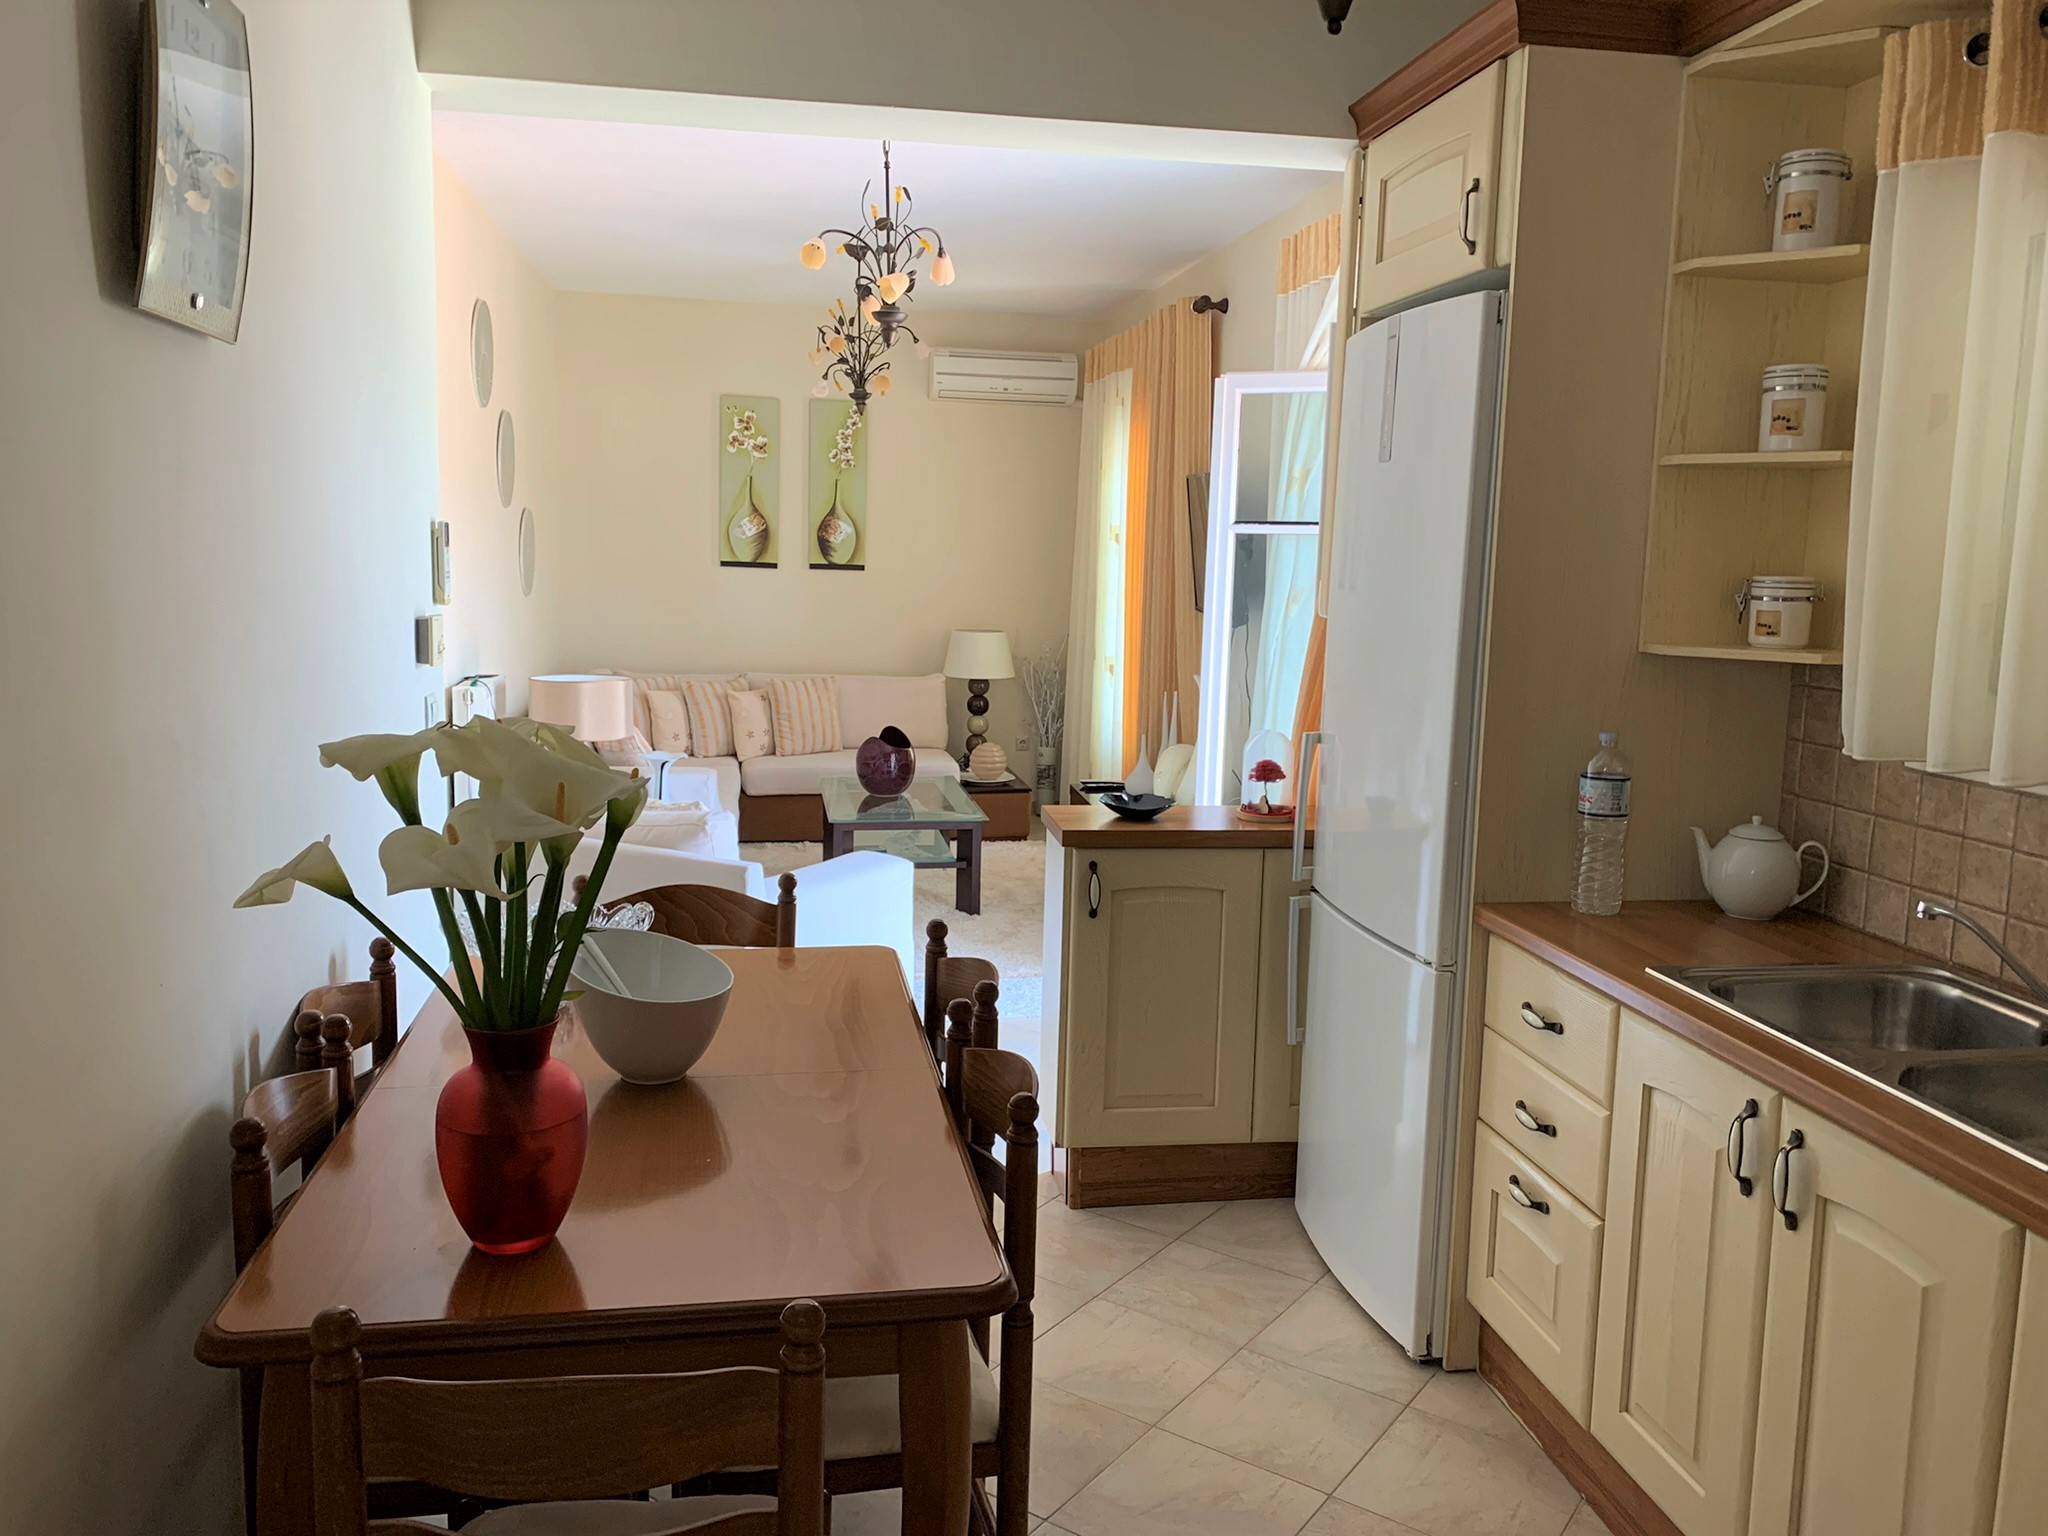 Kitchen area of house for rent in Ithaca Greece, Vathi